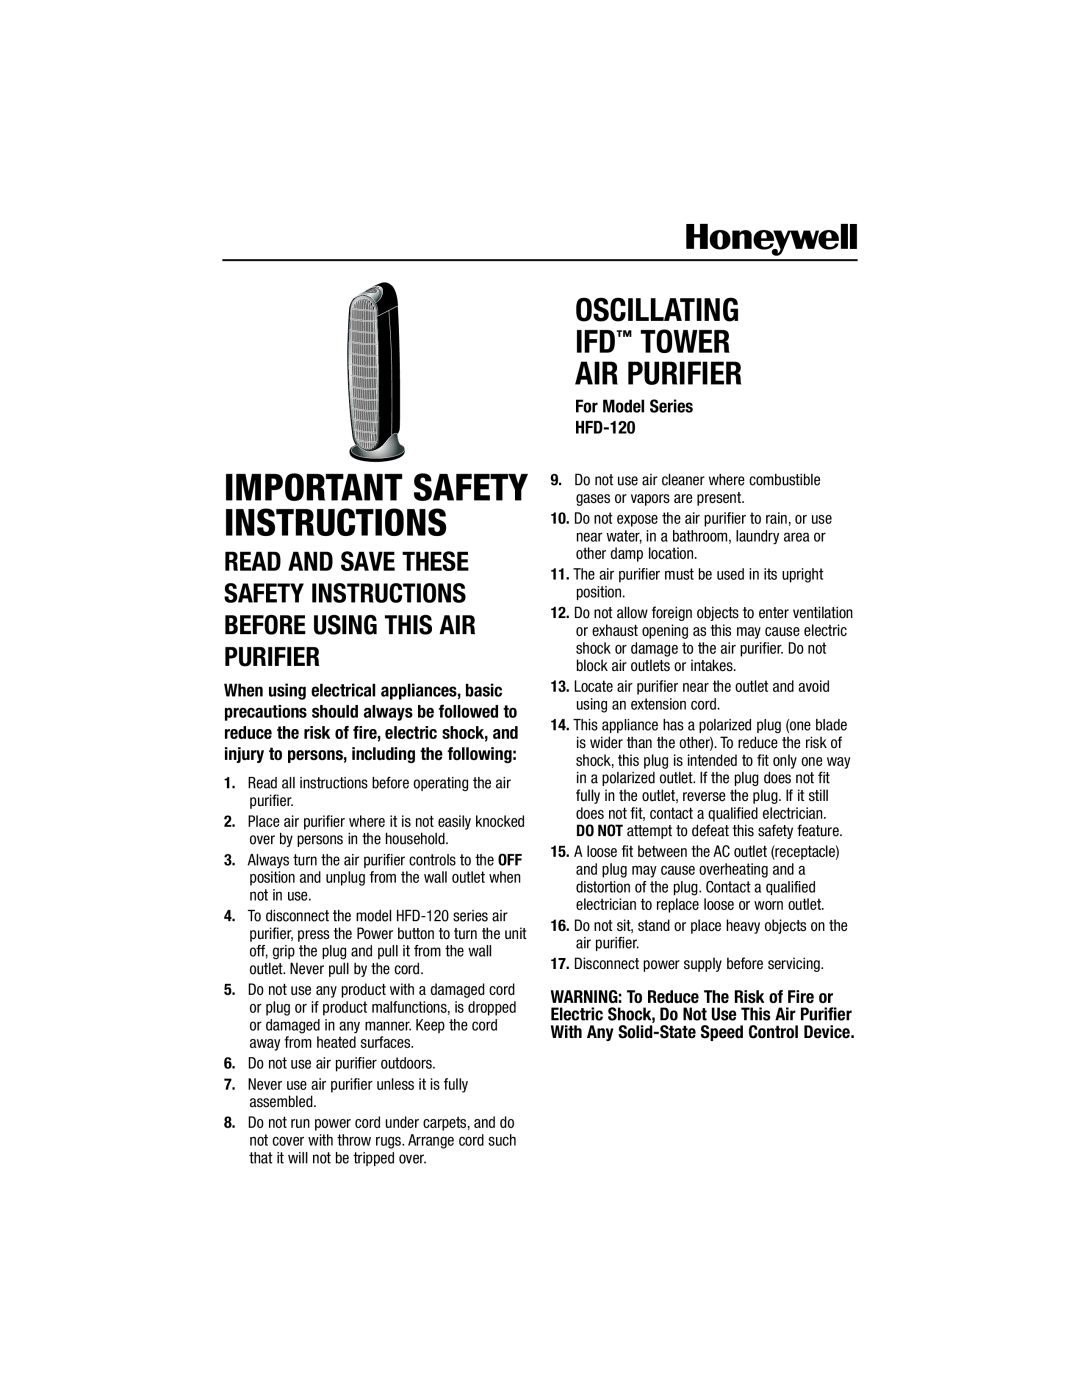 Honeywell HFD120Q important safety instructions Oscillating Ifd Tower Air Purifier, For Model Series HFD-120 